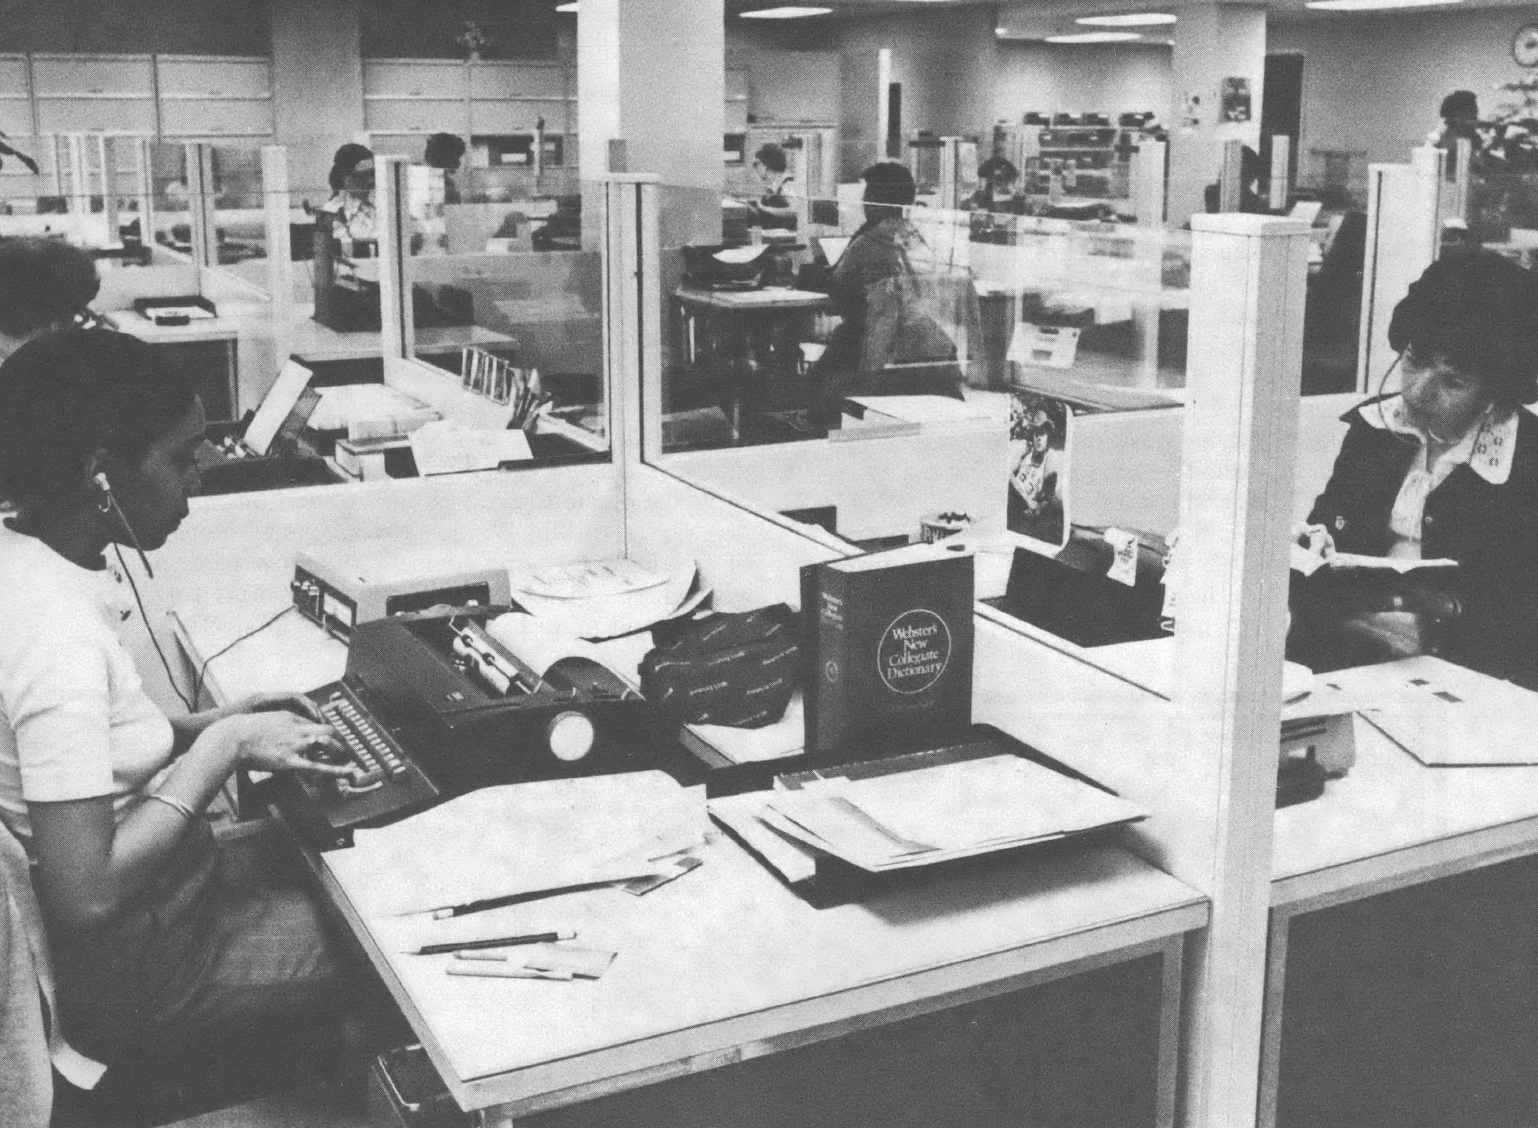 Black and white photo of women working at desks in open office space